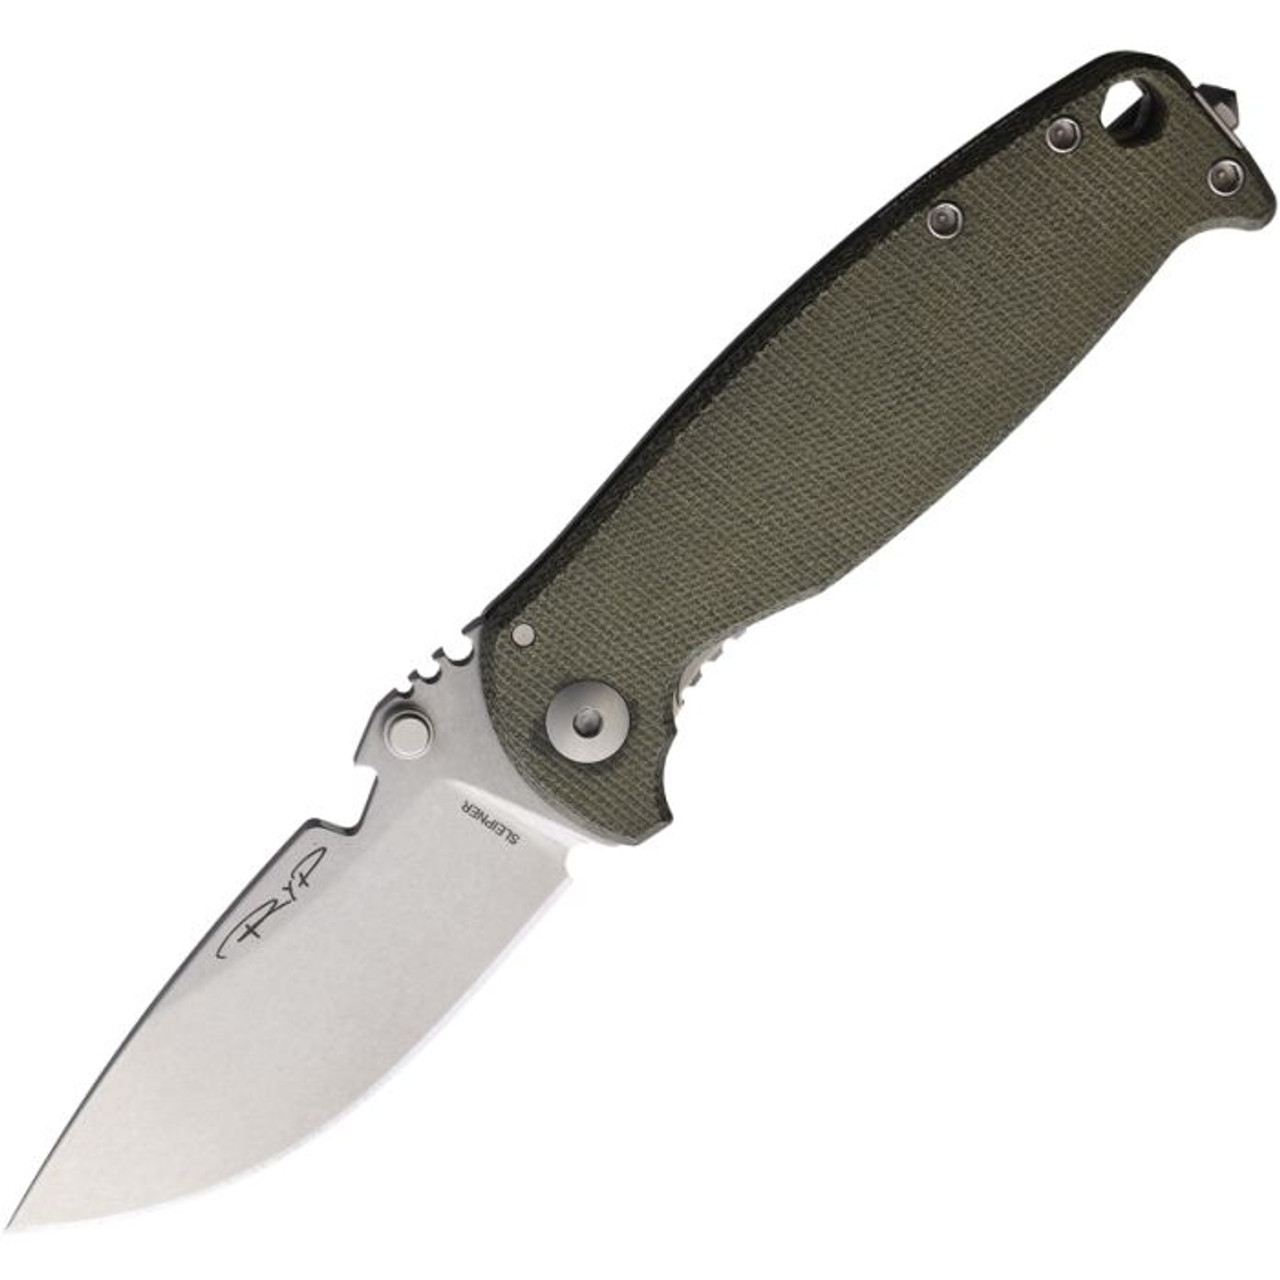 DPX HEST Classic (DPXHSF039) 3.13" Sleipner Stonewashed Drop Point Plain Blade, OD Green G-10 Handle with Titanium Back Handle